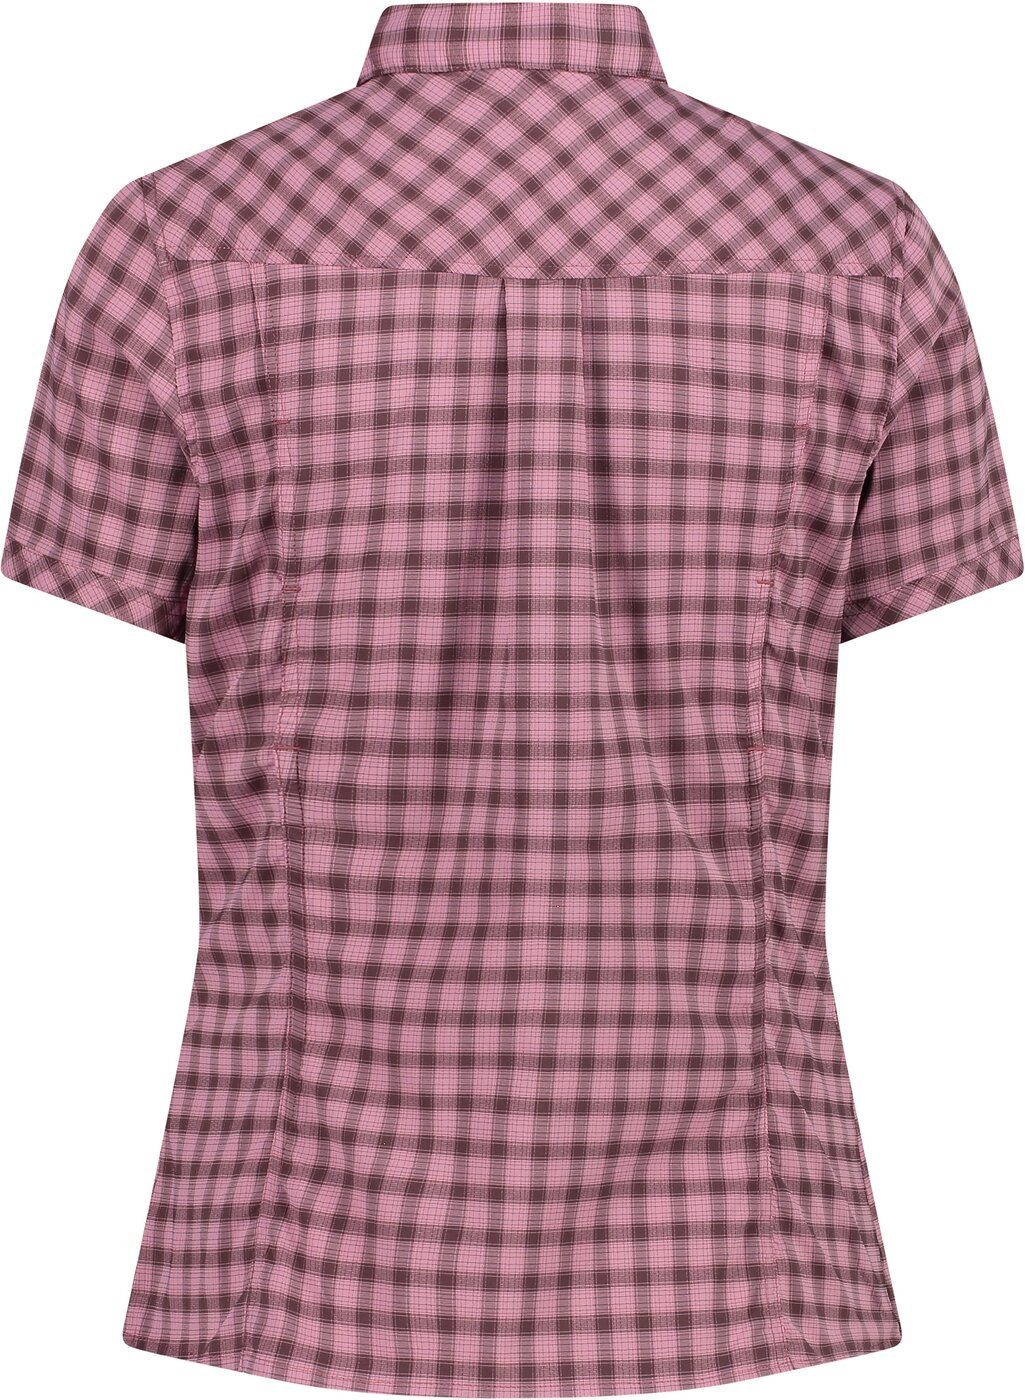 Outdoorbluse WOMAN 74ZN FARD-PLUM-ANTRACITE CAMPAGNOLO SHIRT